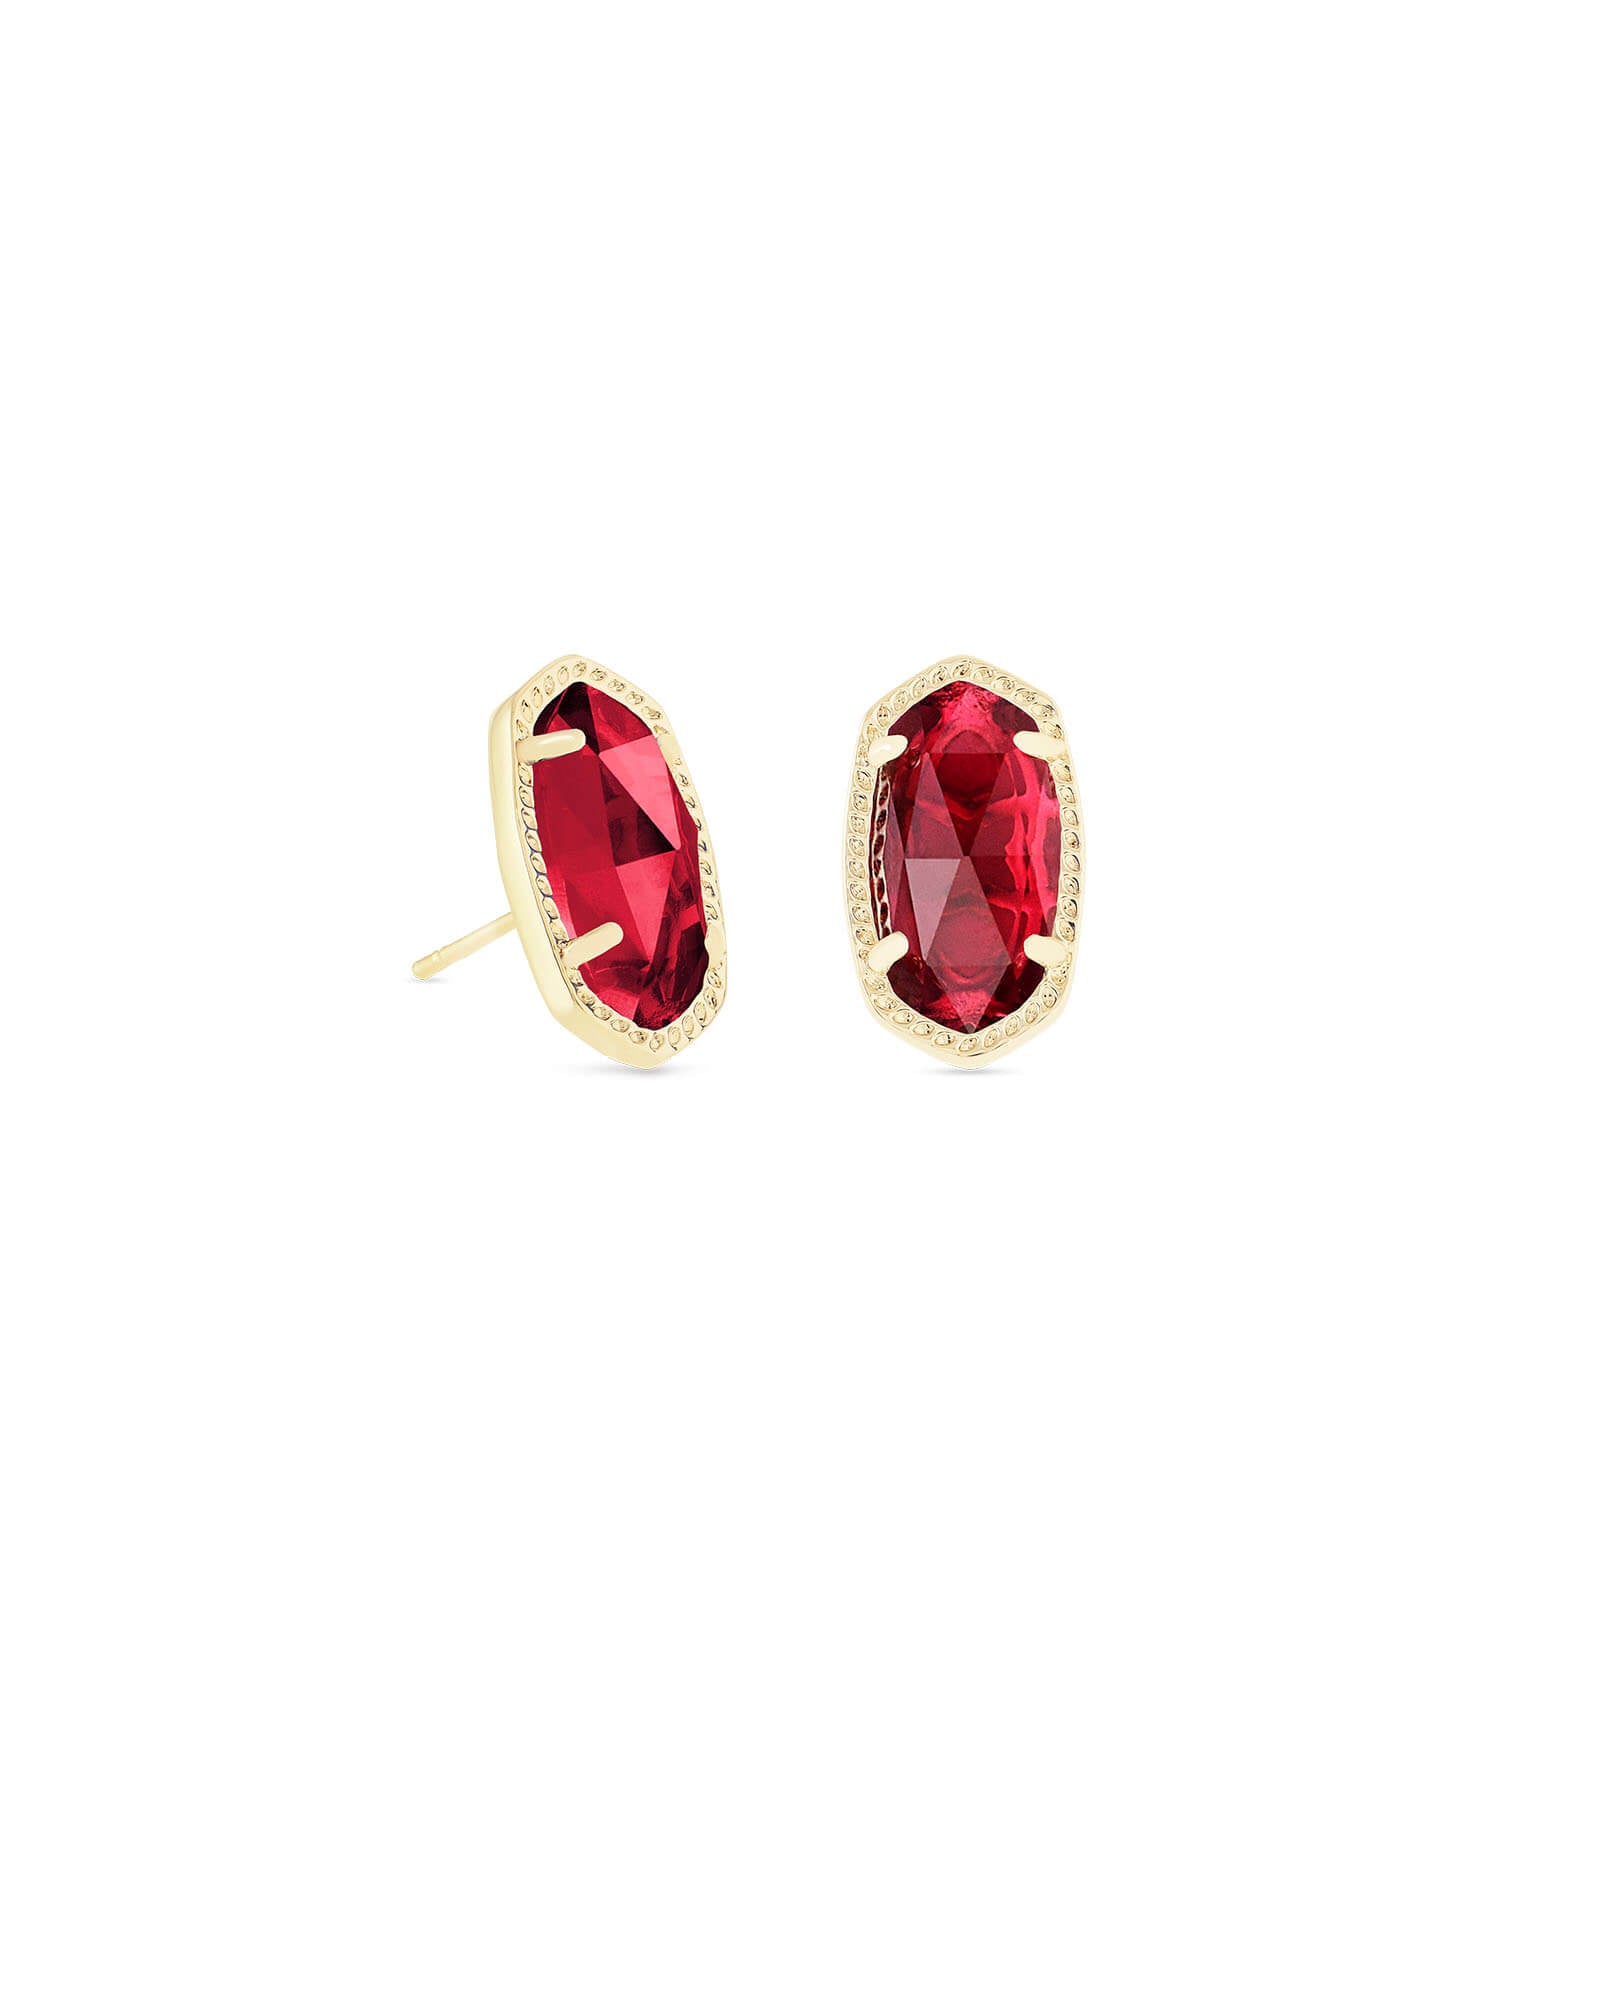 Kendra Scott | Ellie Gold Stud Earrings in Clear Berry - Giddy Up Glamour Boutique